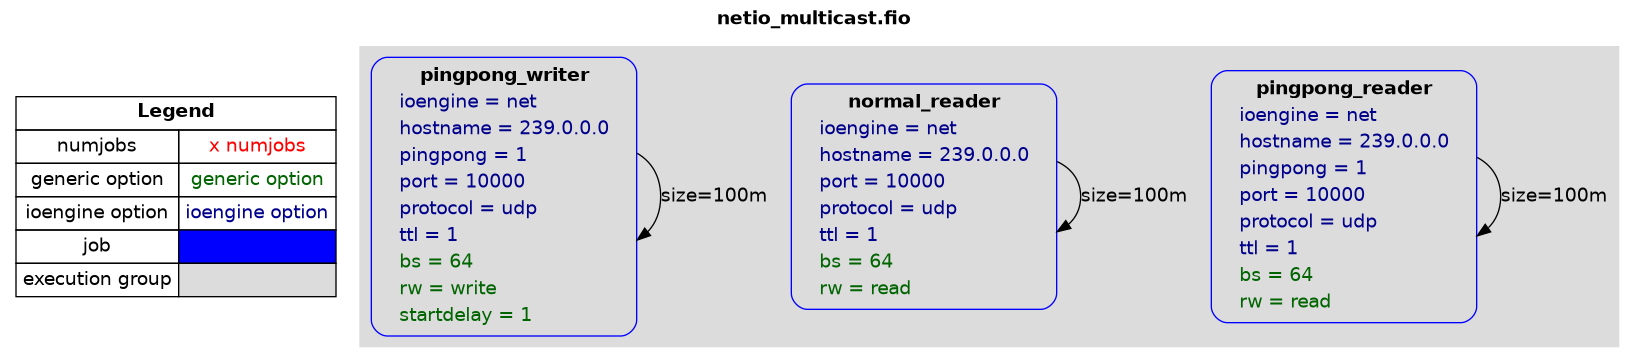 examples/netio_multicast.png